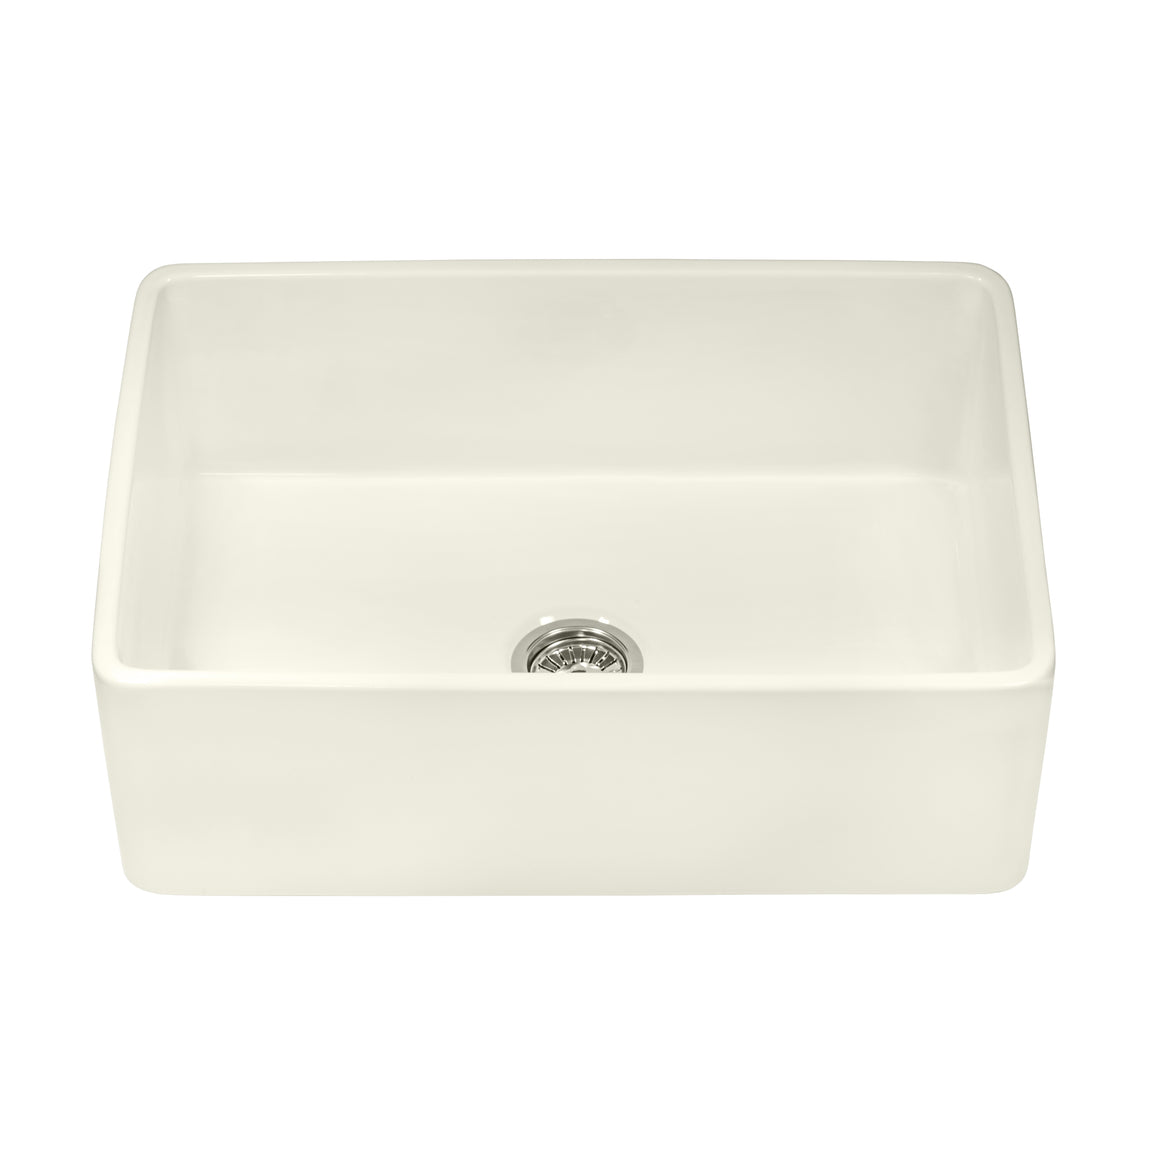 Ruvati 33 x 20 inch Fireclay Reversible Farmhouse Apron-Front Kitchen Sink Single Bowl - Biscuit - RVL2300BS